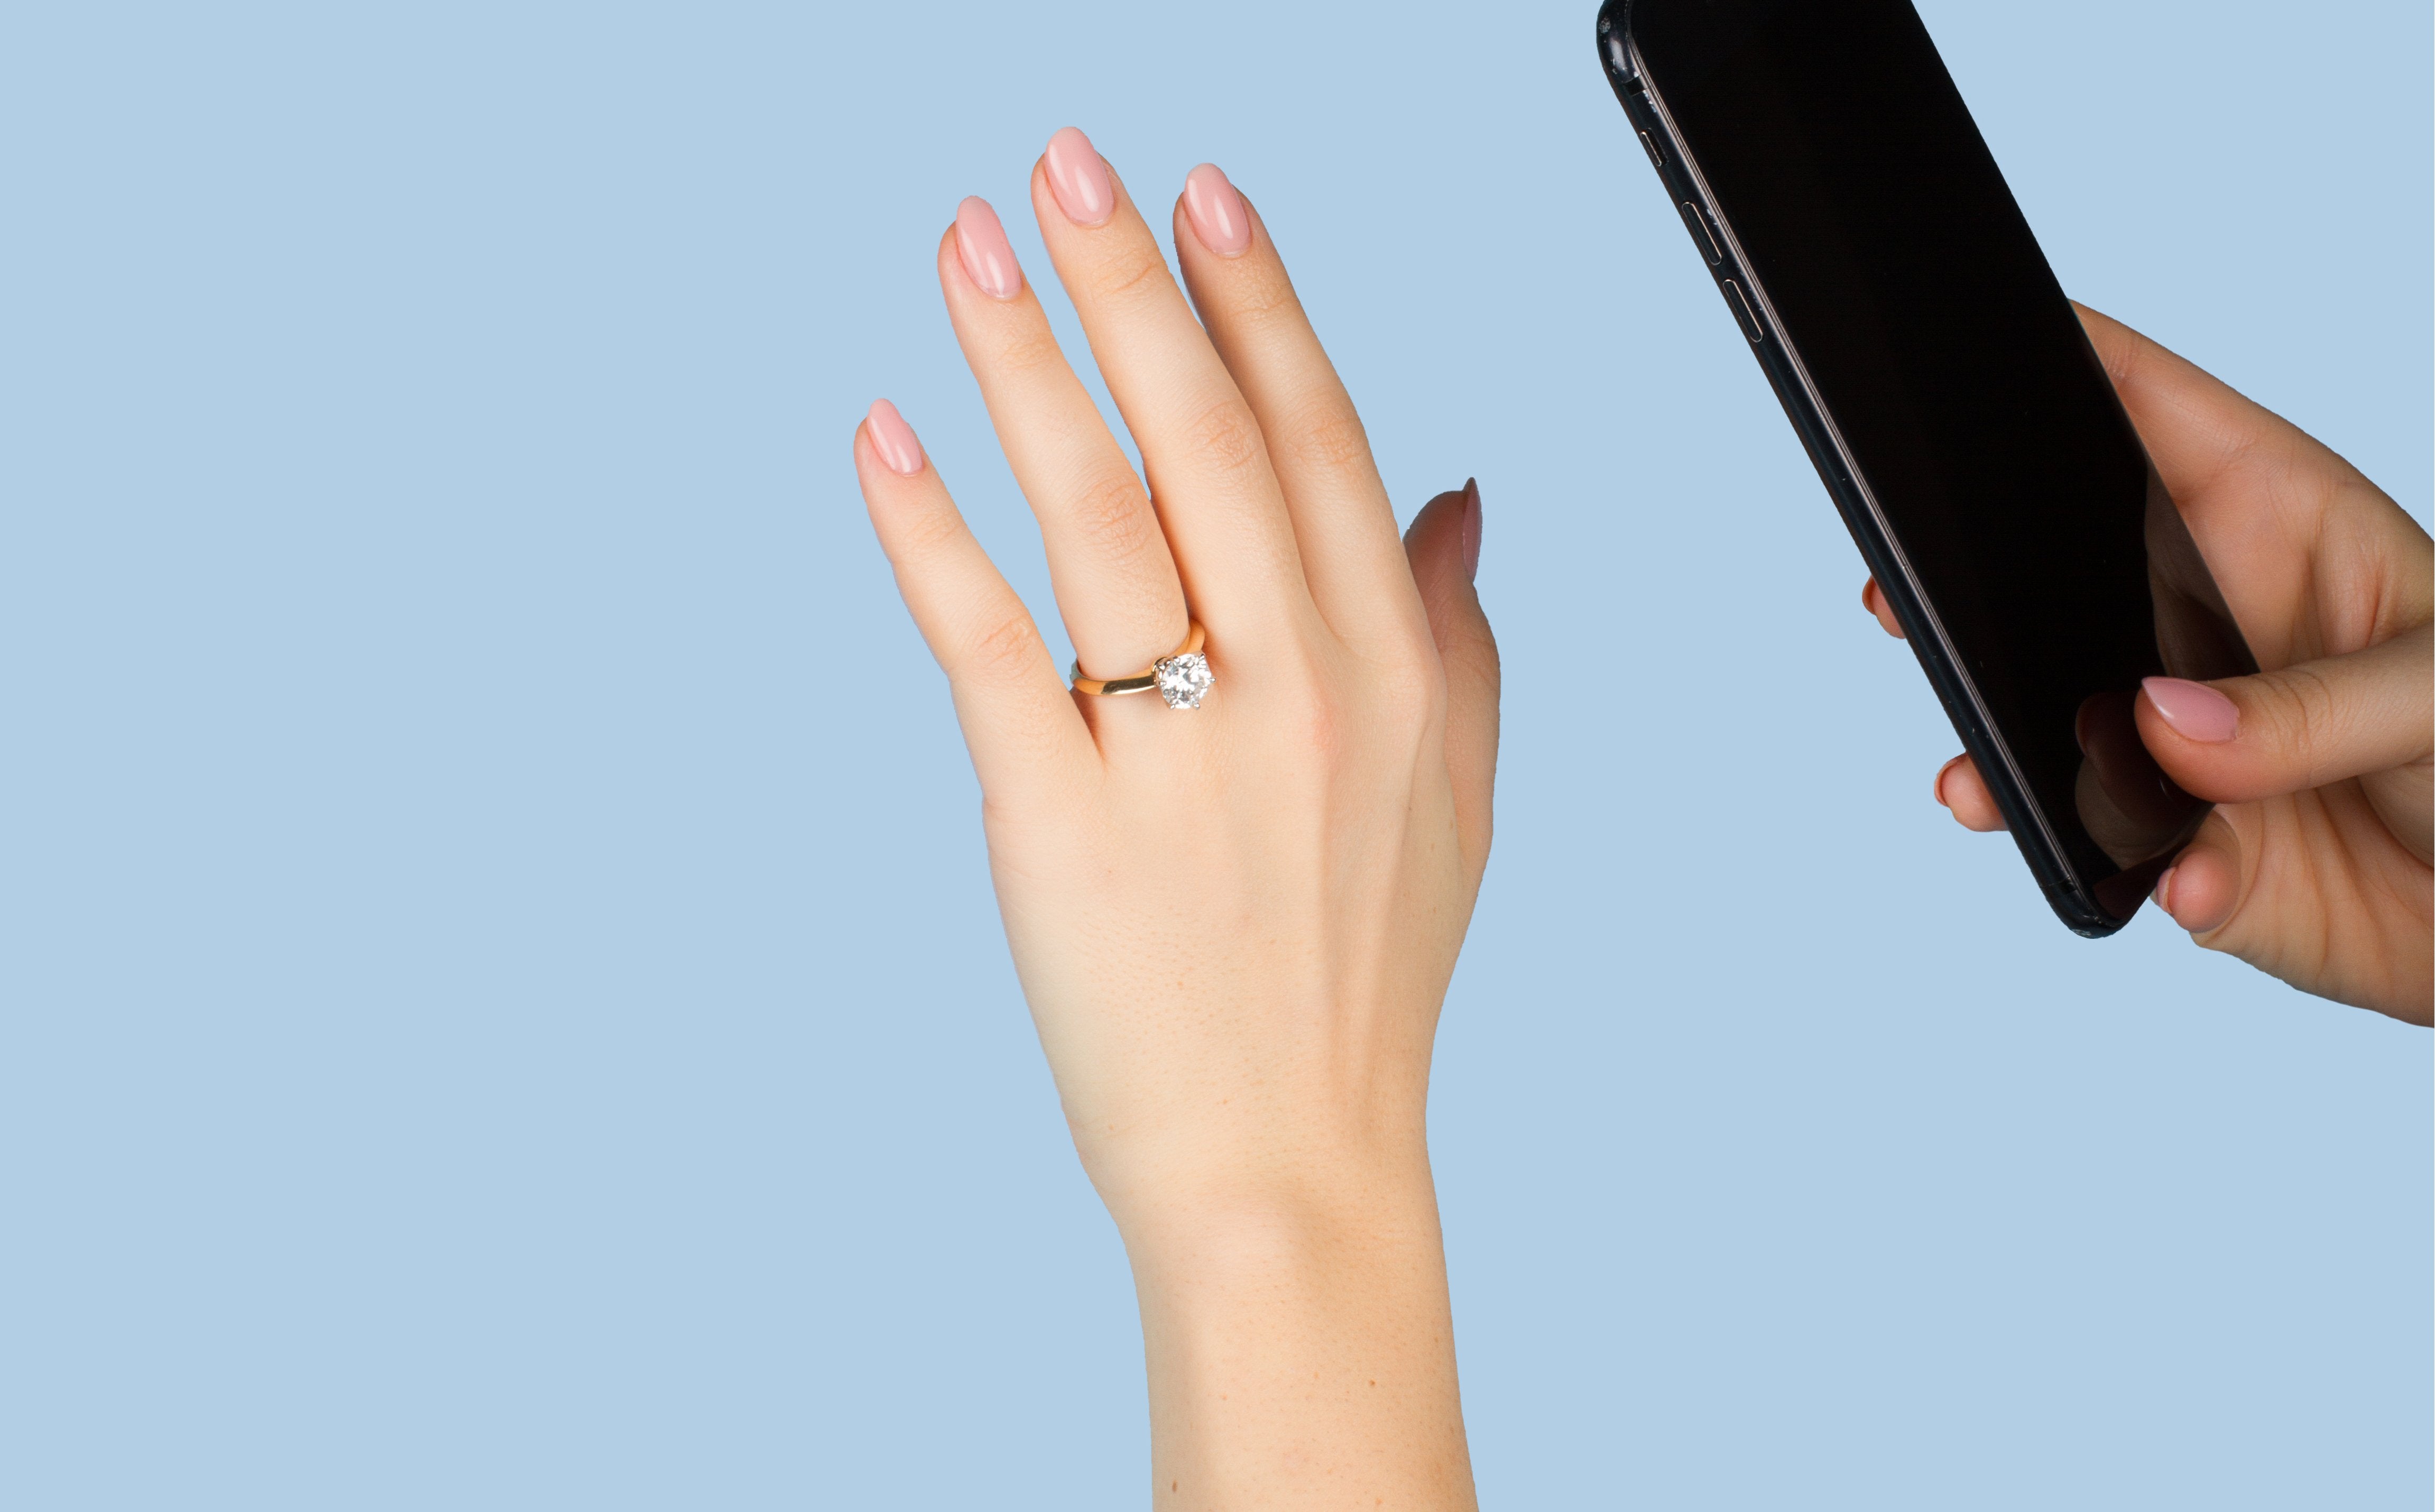 How to Take the Perfect Ring Selfie